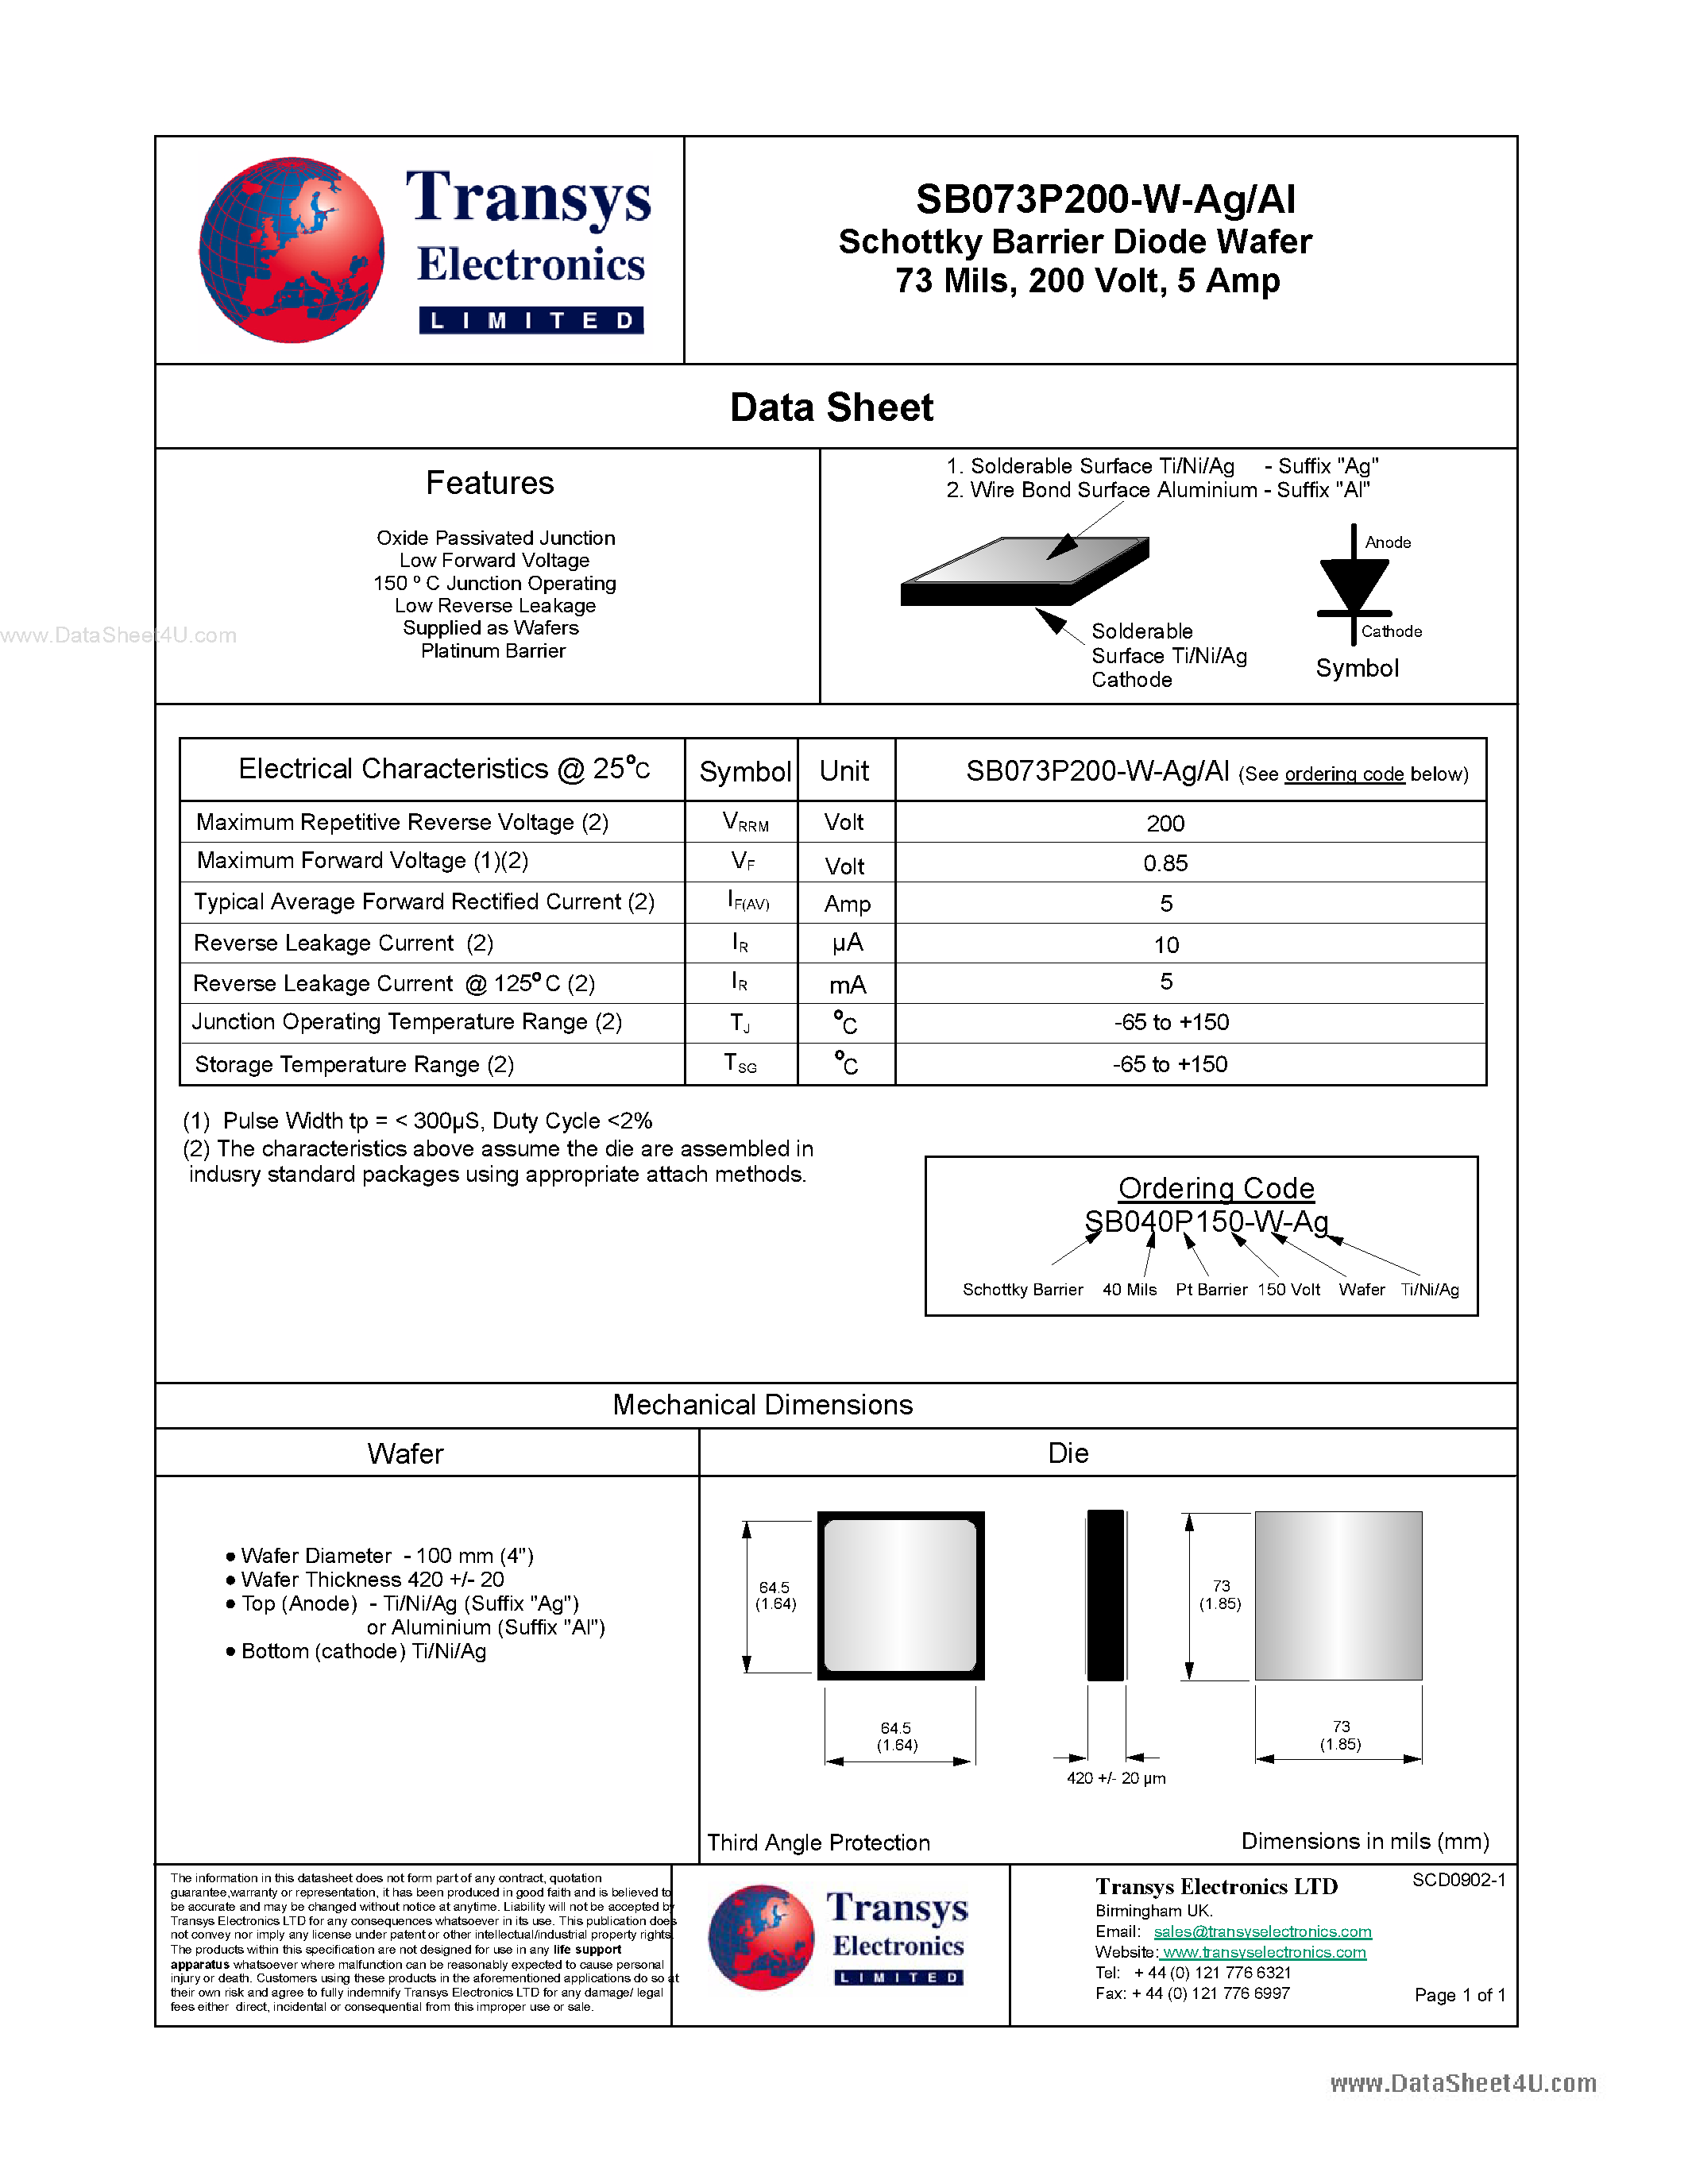 Datasheet SB073P200-W-AG - Schottky Barrier Diode Wafer page 1